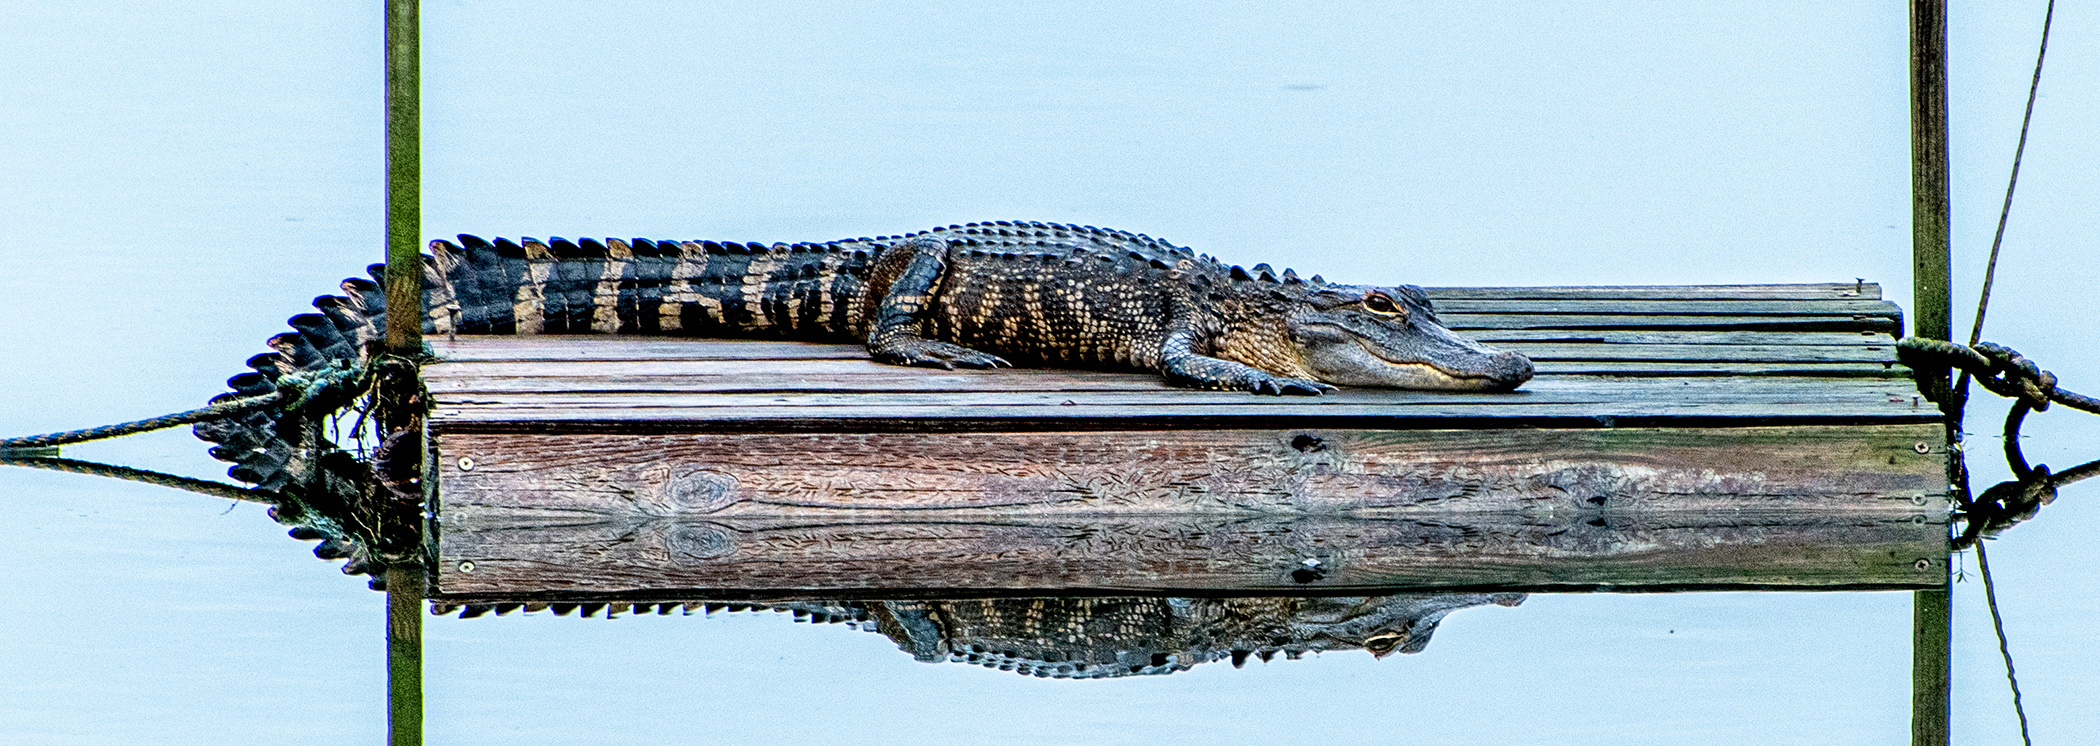 Comfy-Gator-on-the-Turtle-Dock